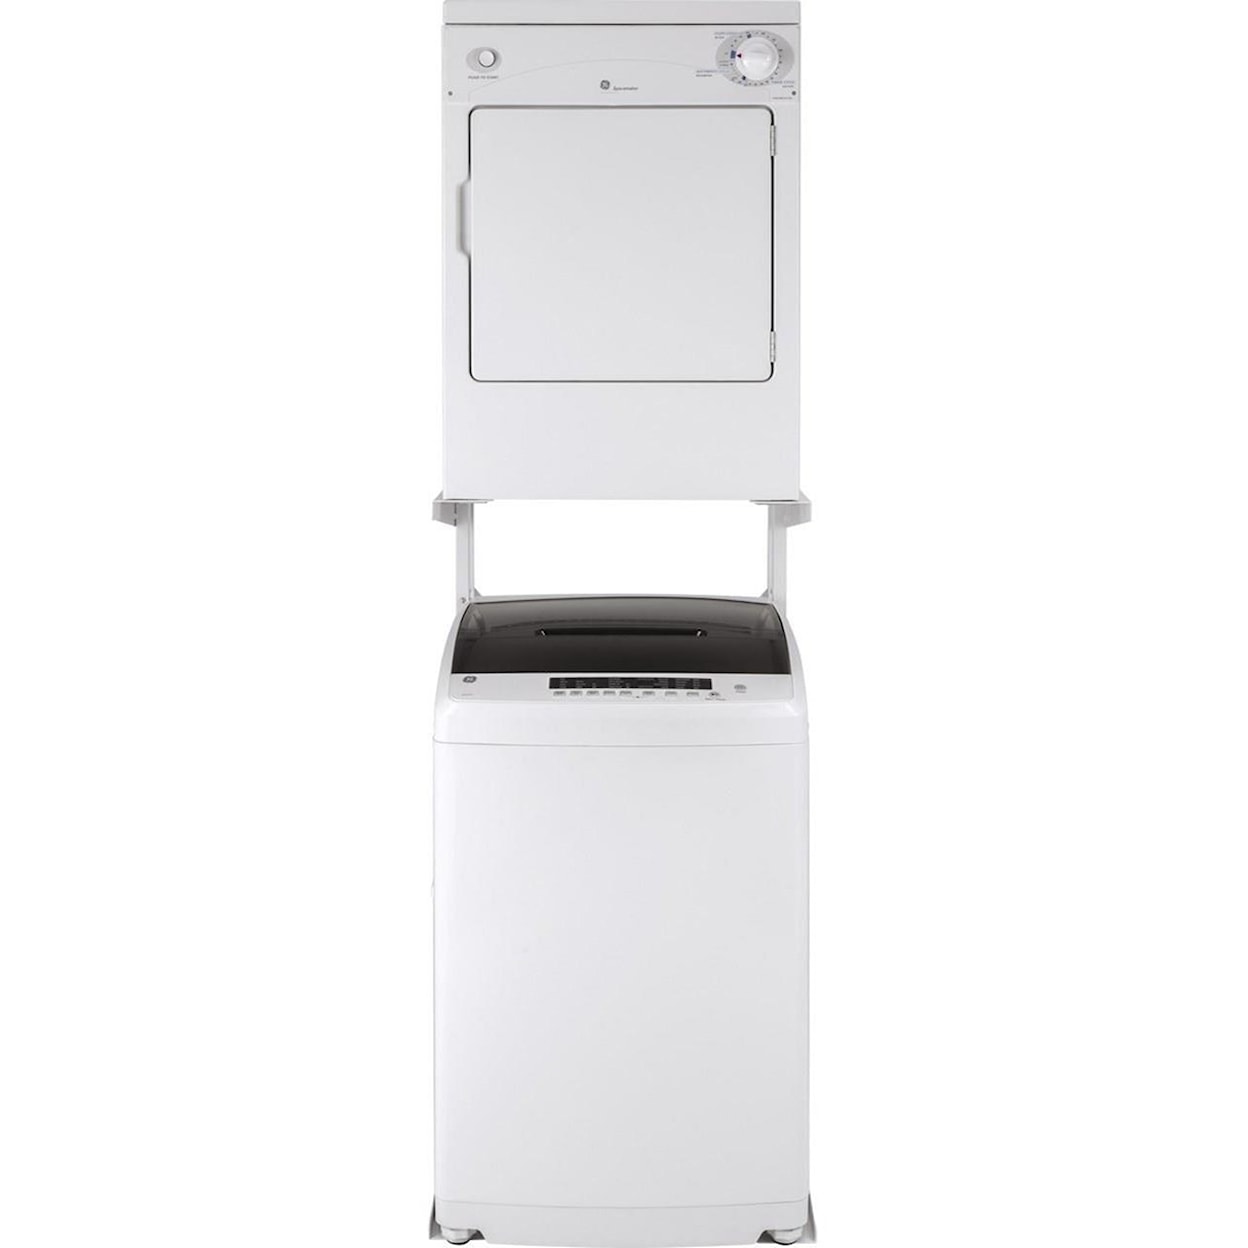 GE Appliances Home Laundry GE® Space-Saving 2.8 cu. ft. Portable Washer